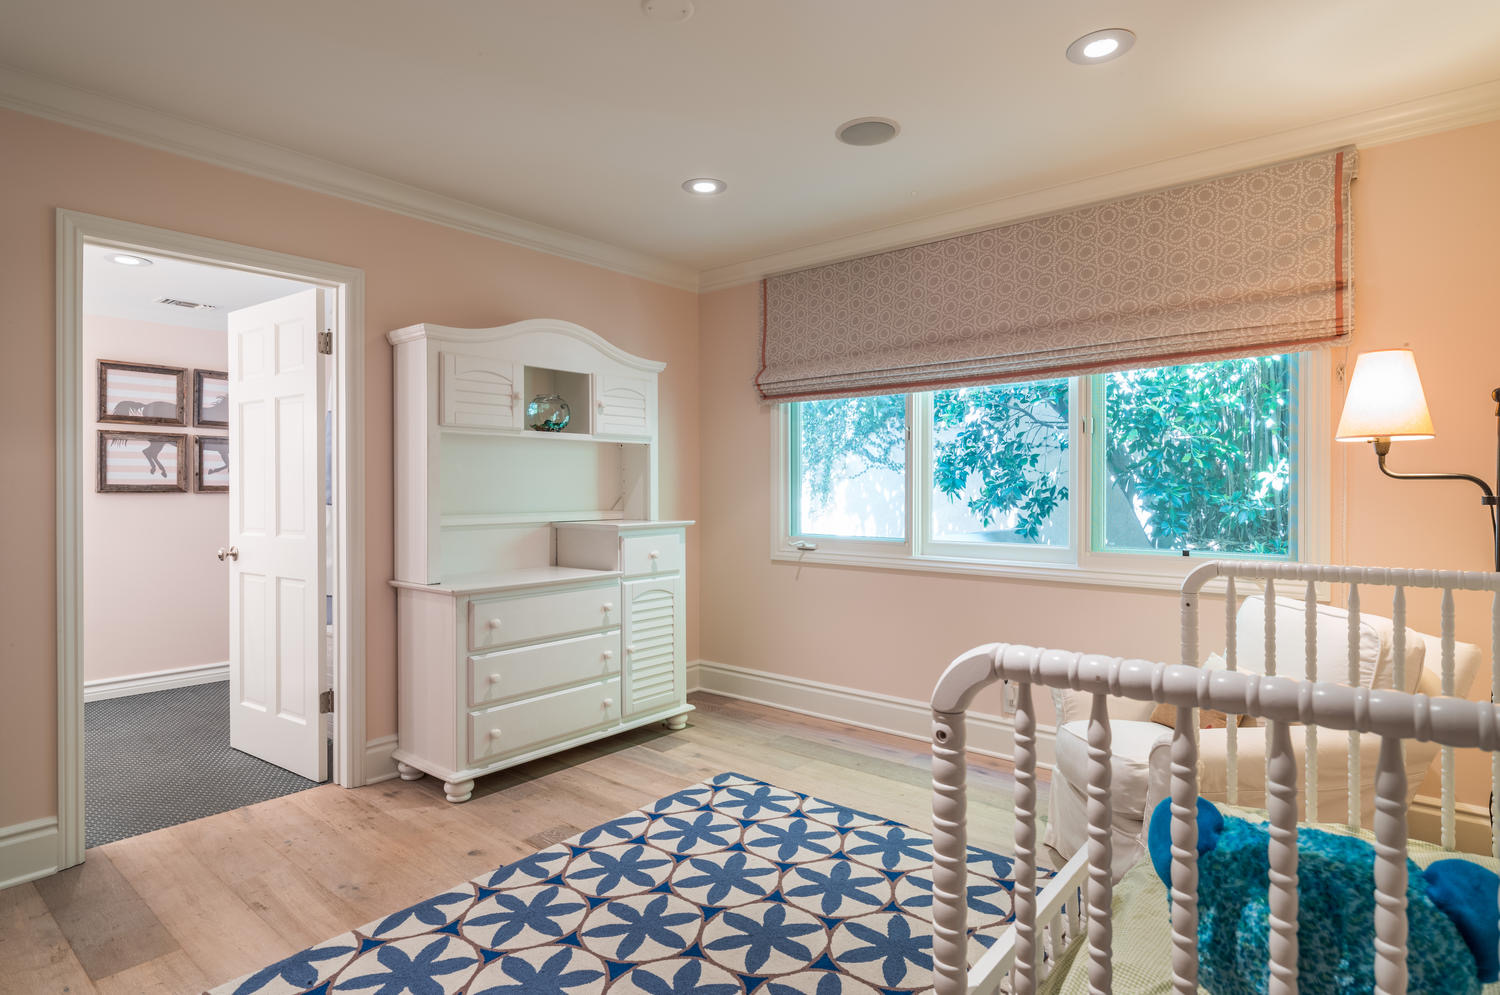 Baby's room with crib and dressing table